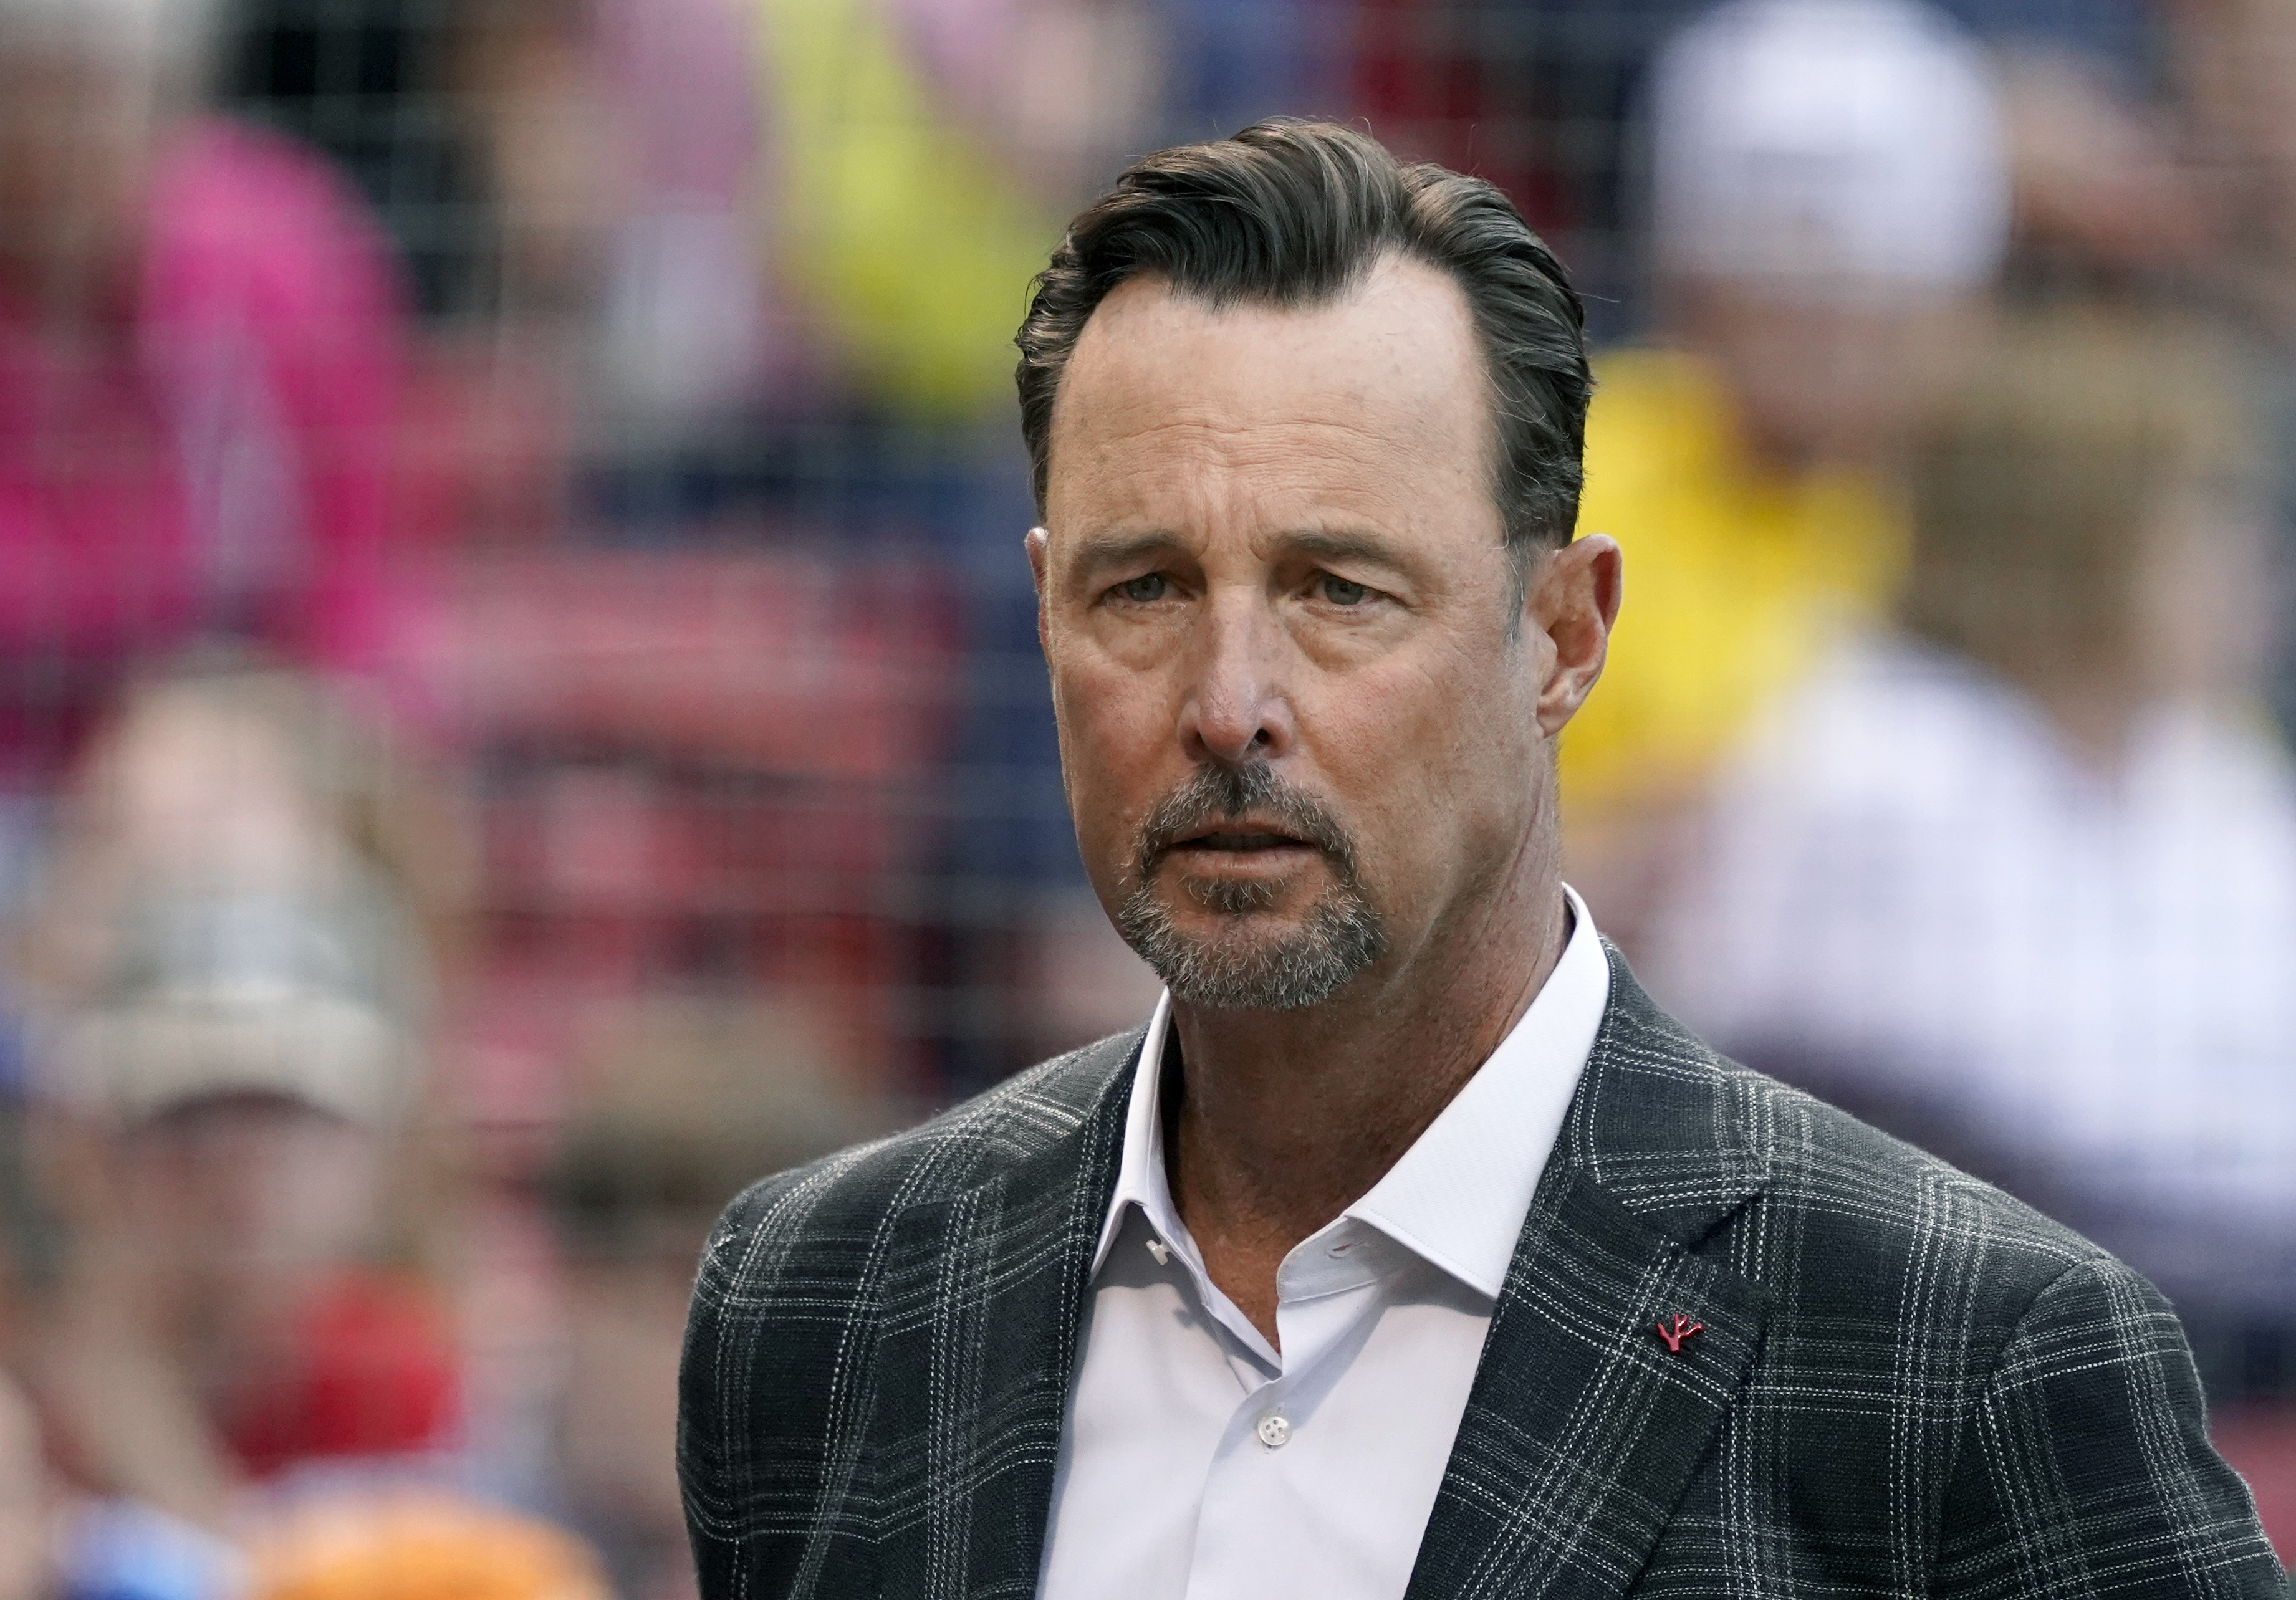 Tim Wakefield, who revived his career and Red Sox trophy case with